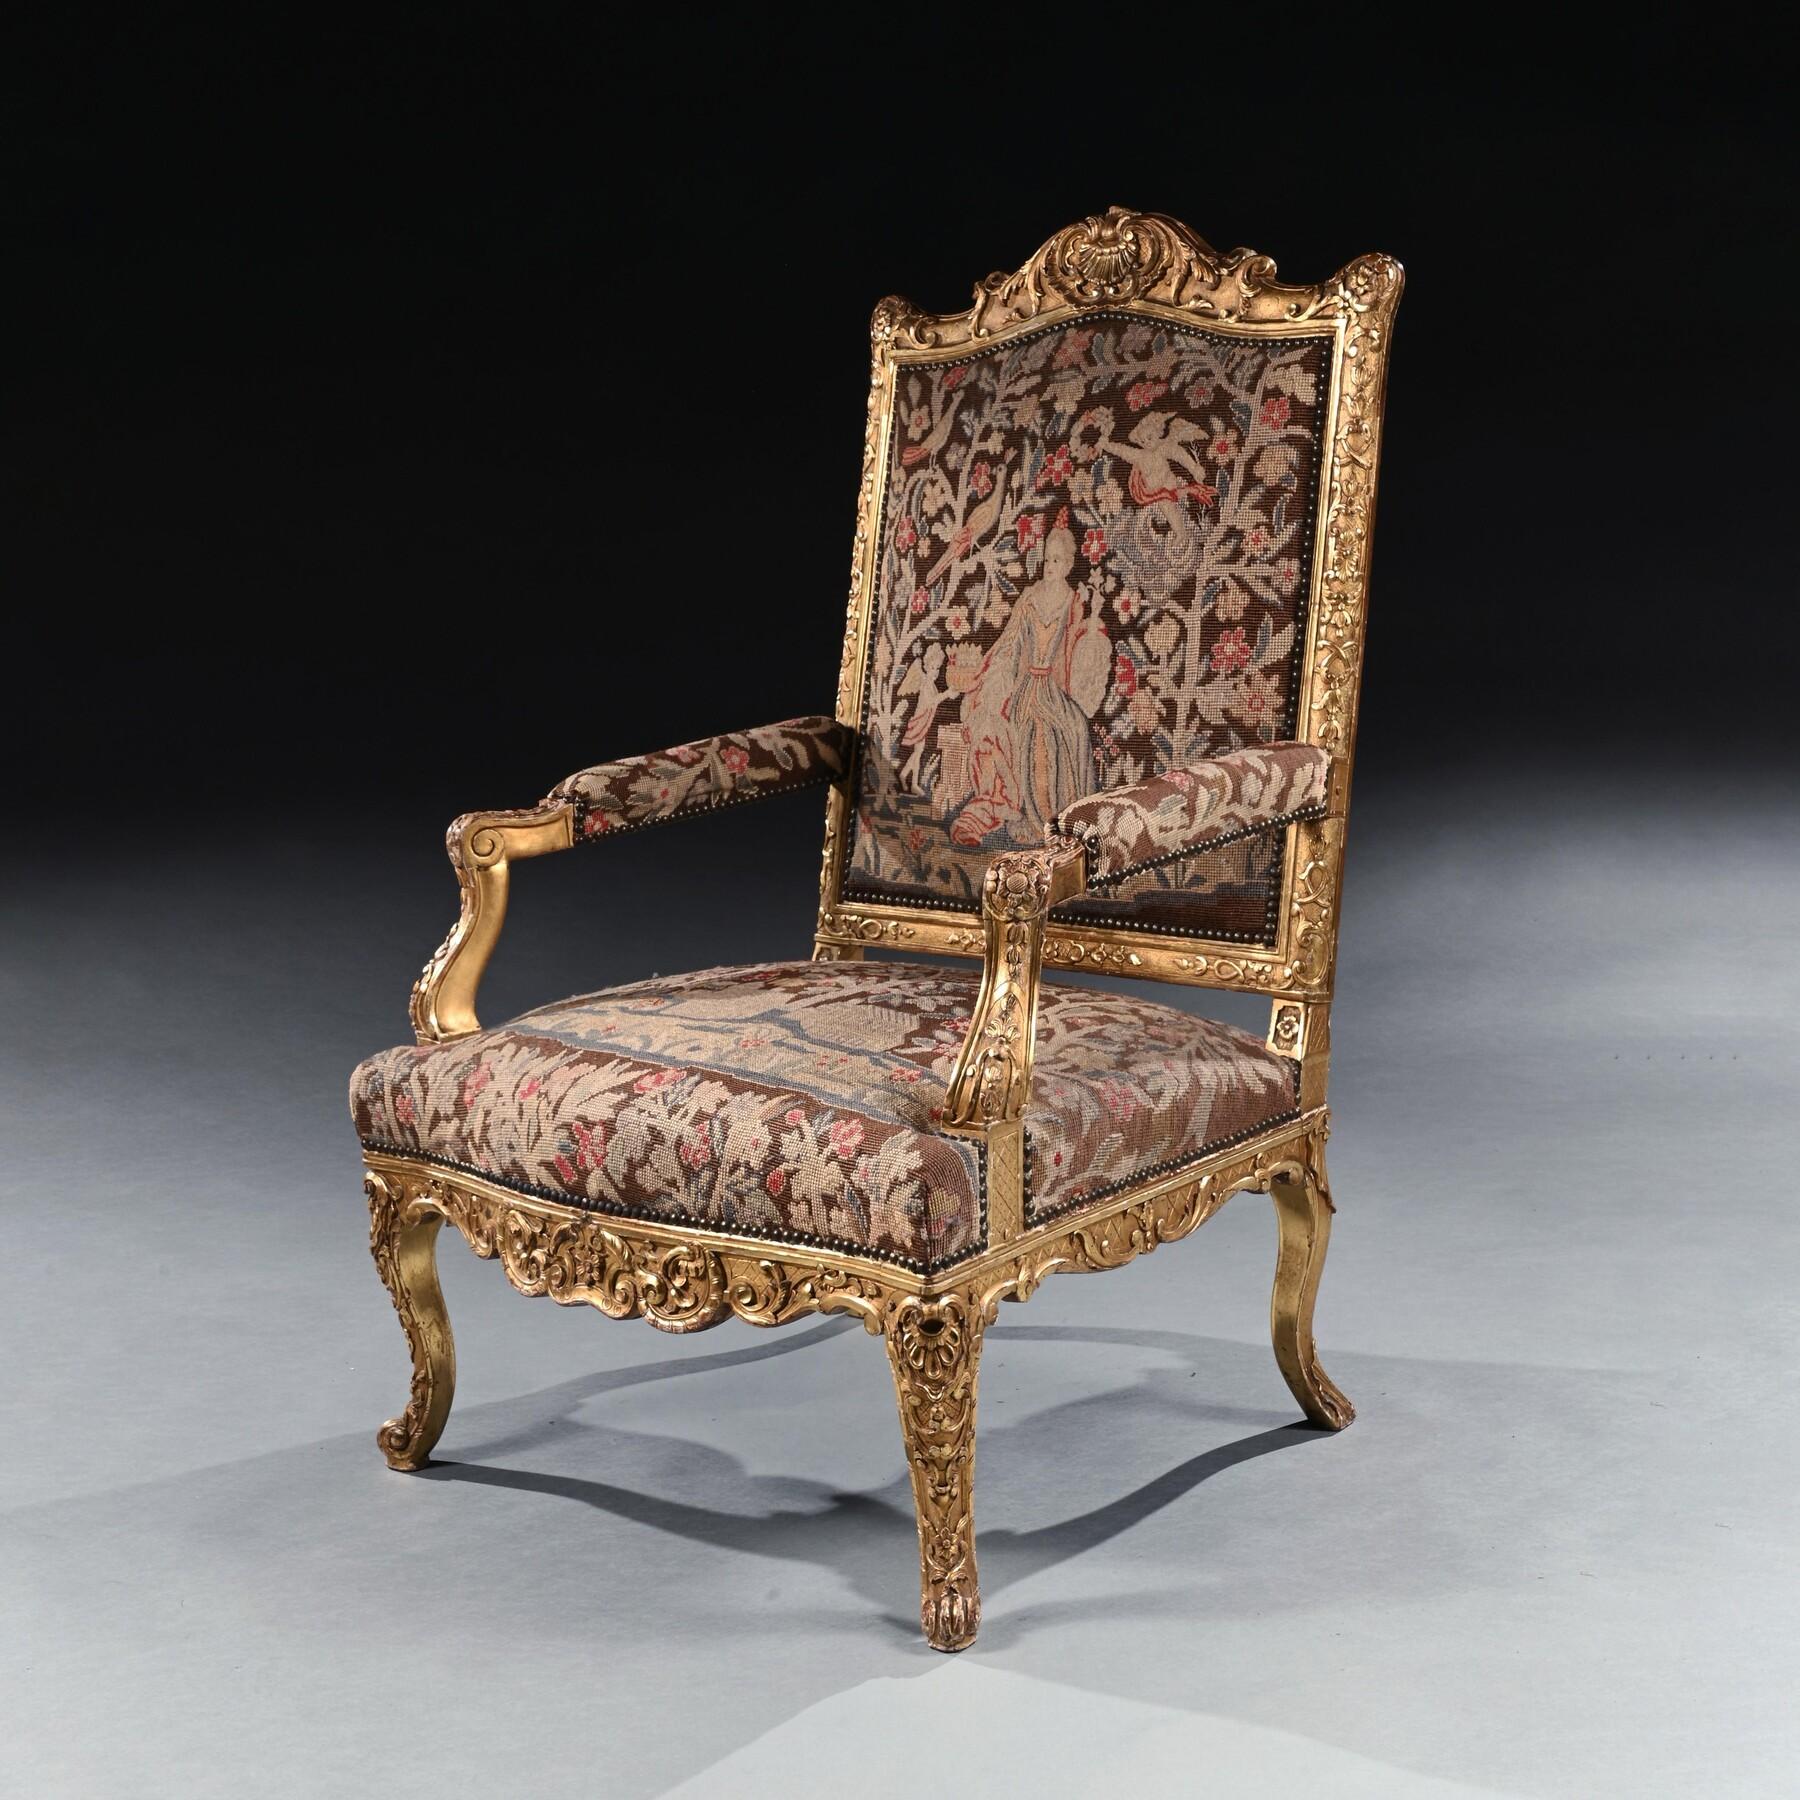 Fine 18th Century French Regence Period Giltwood Armchair Fauteuil For Sale 5